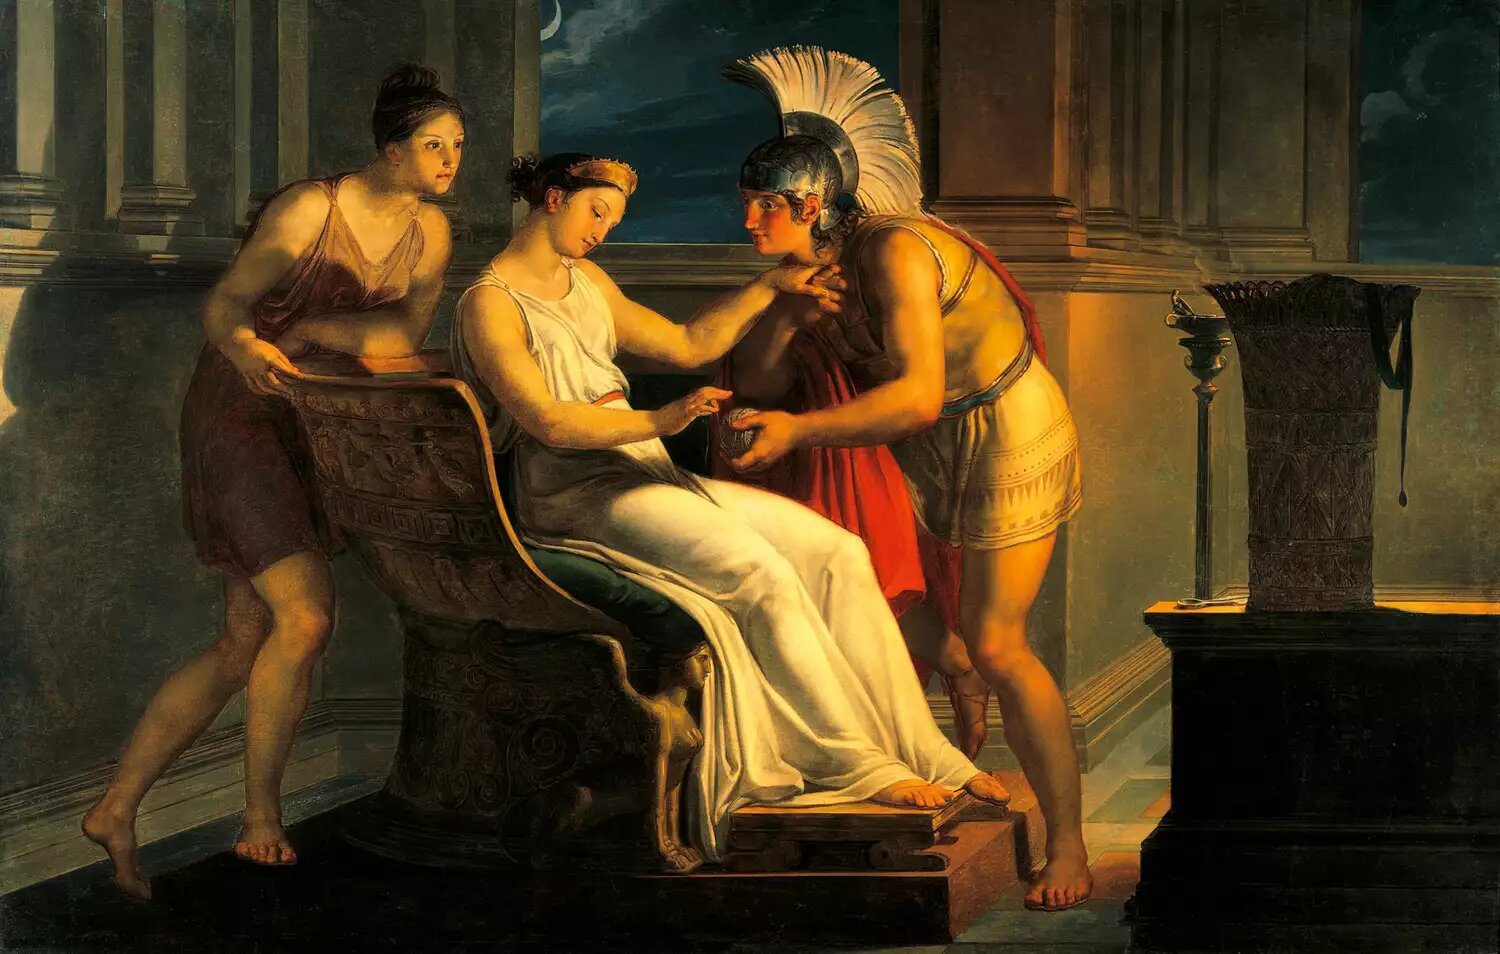 This painting represents Theseus receiving the thread from Ariadne. She is dressed in white clothes and he wears a warrior's helmet.